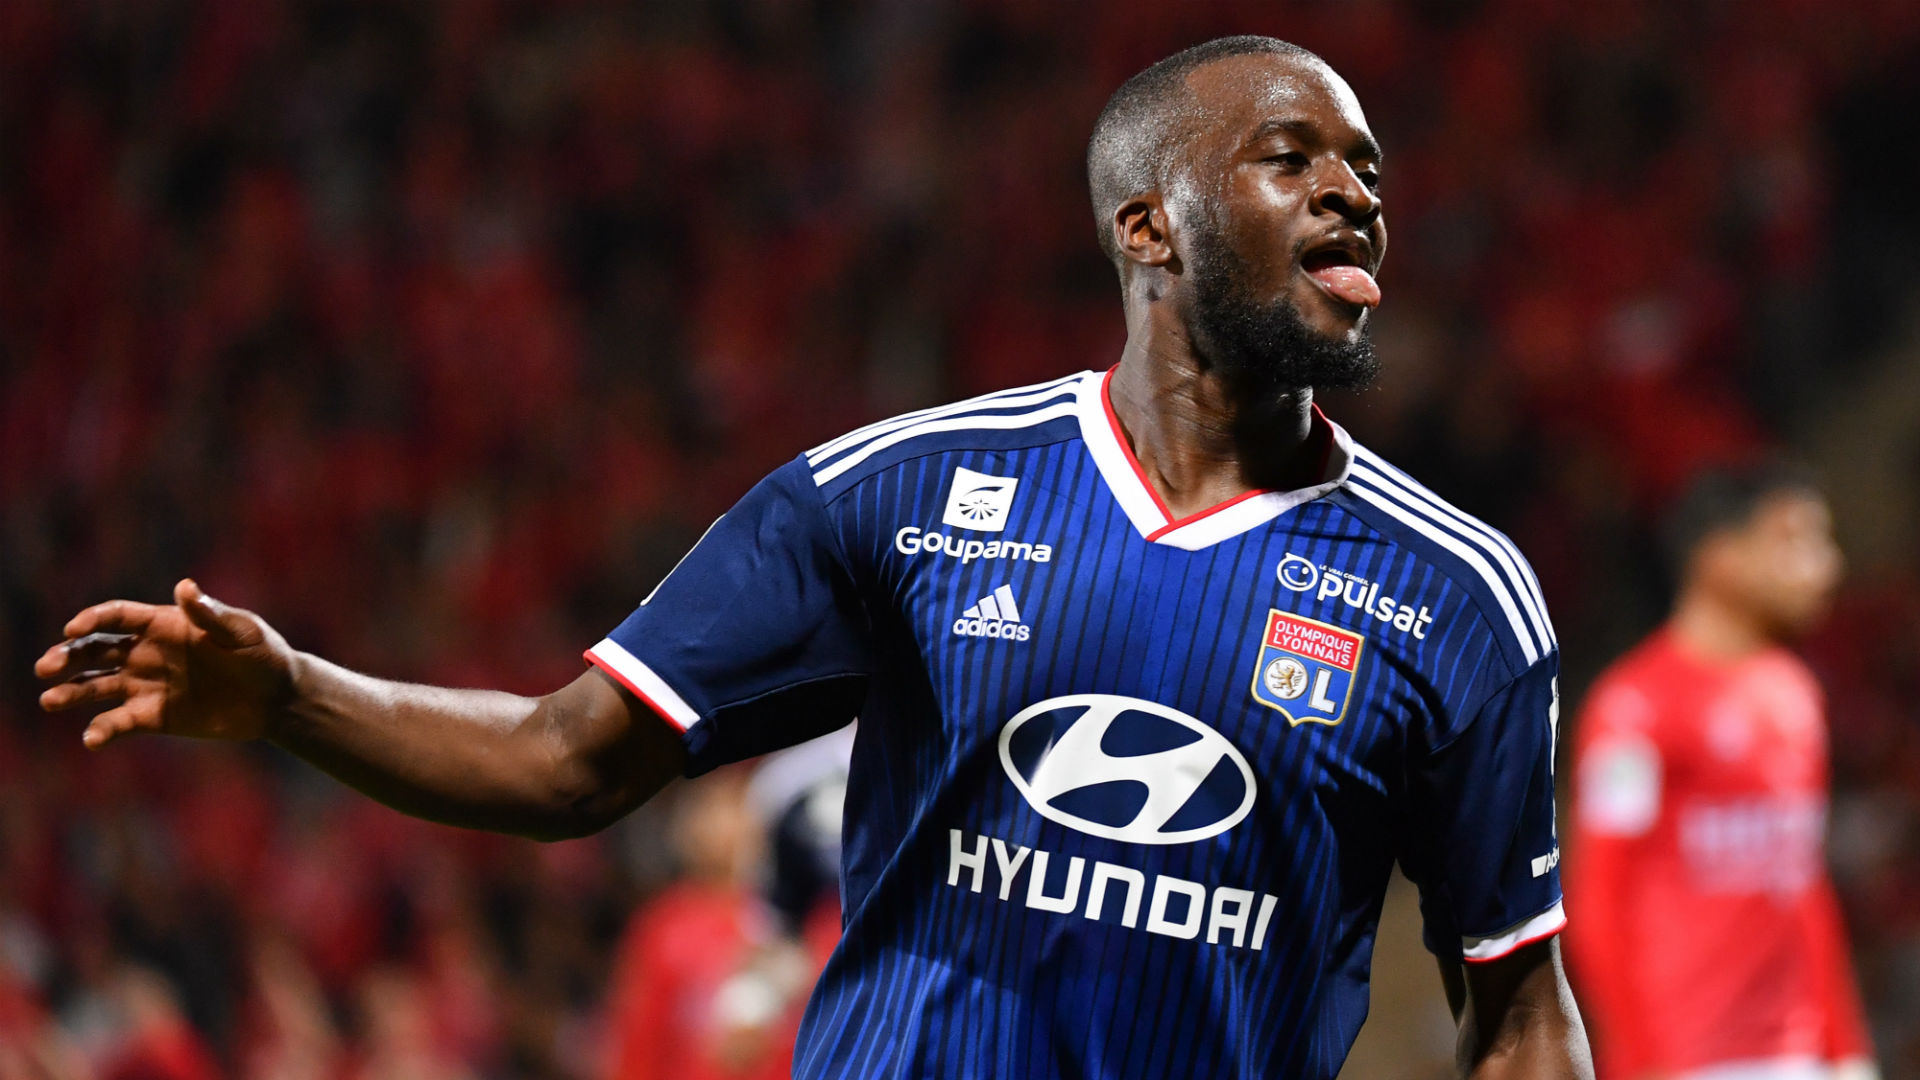 Tanguy Ndombele is a rumoured target for several top European clubs, but Lyon are yet to receive an acceptable offer.